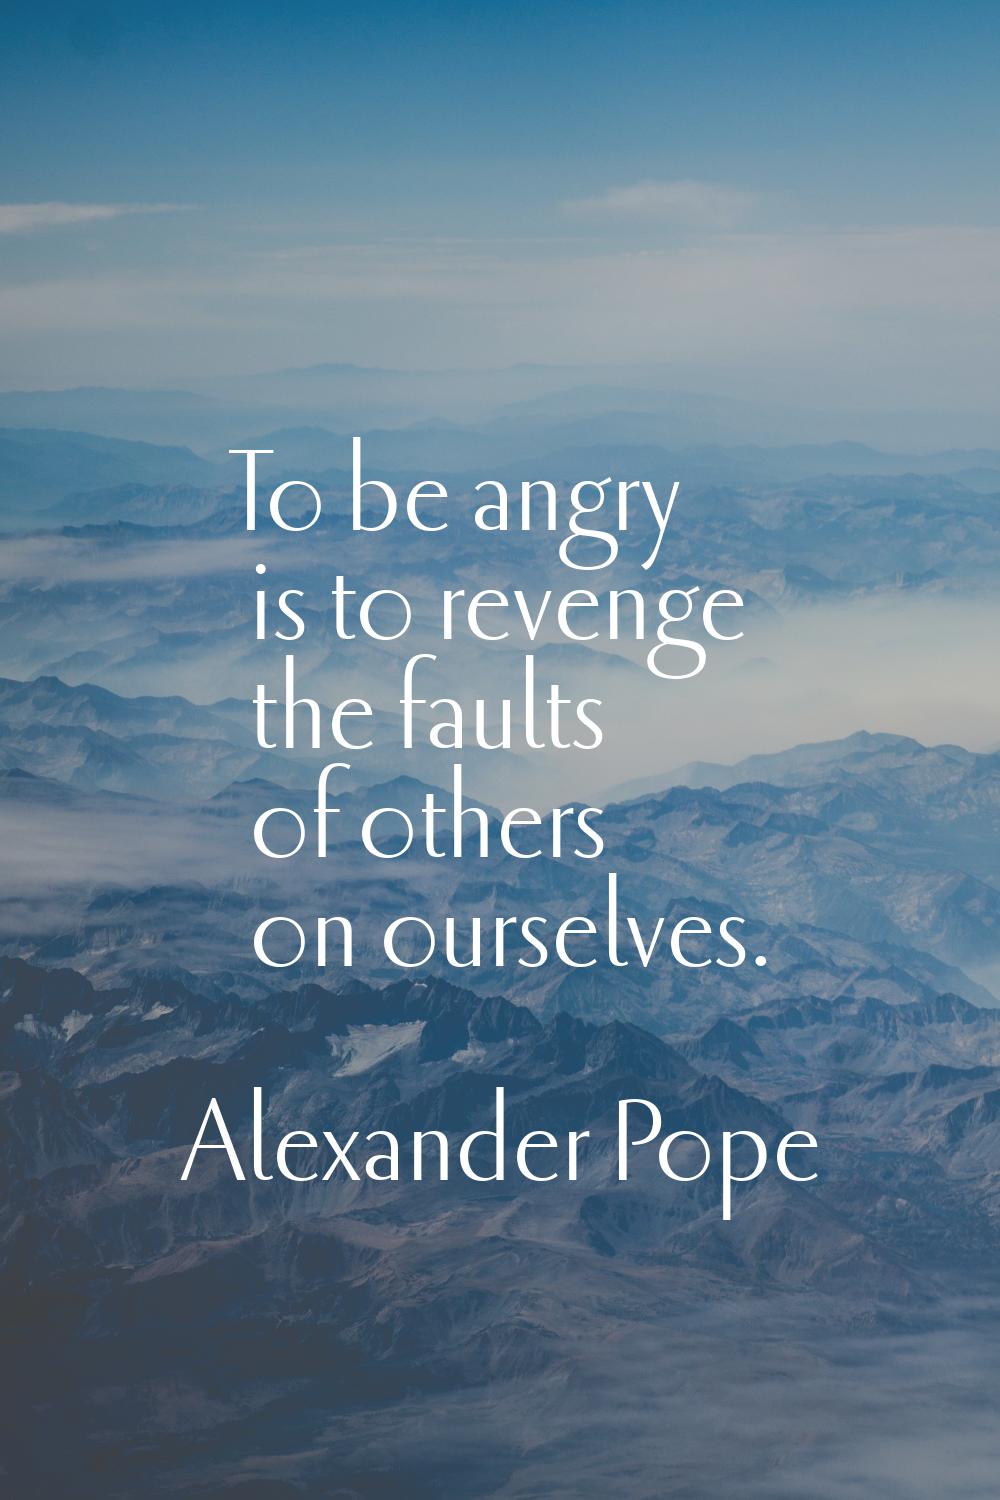 To be angry is to revenge the faults of others on ourselves.